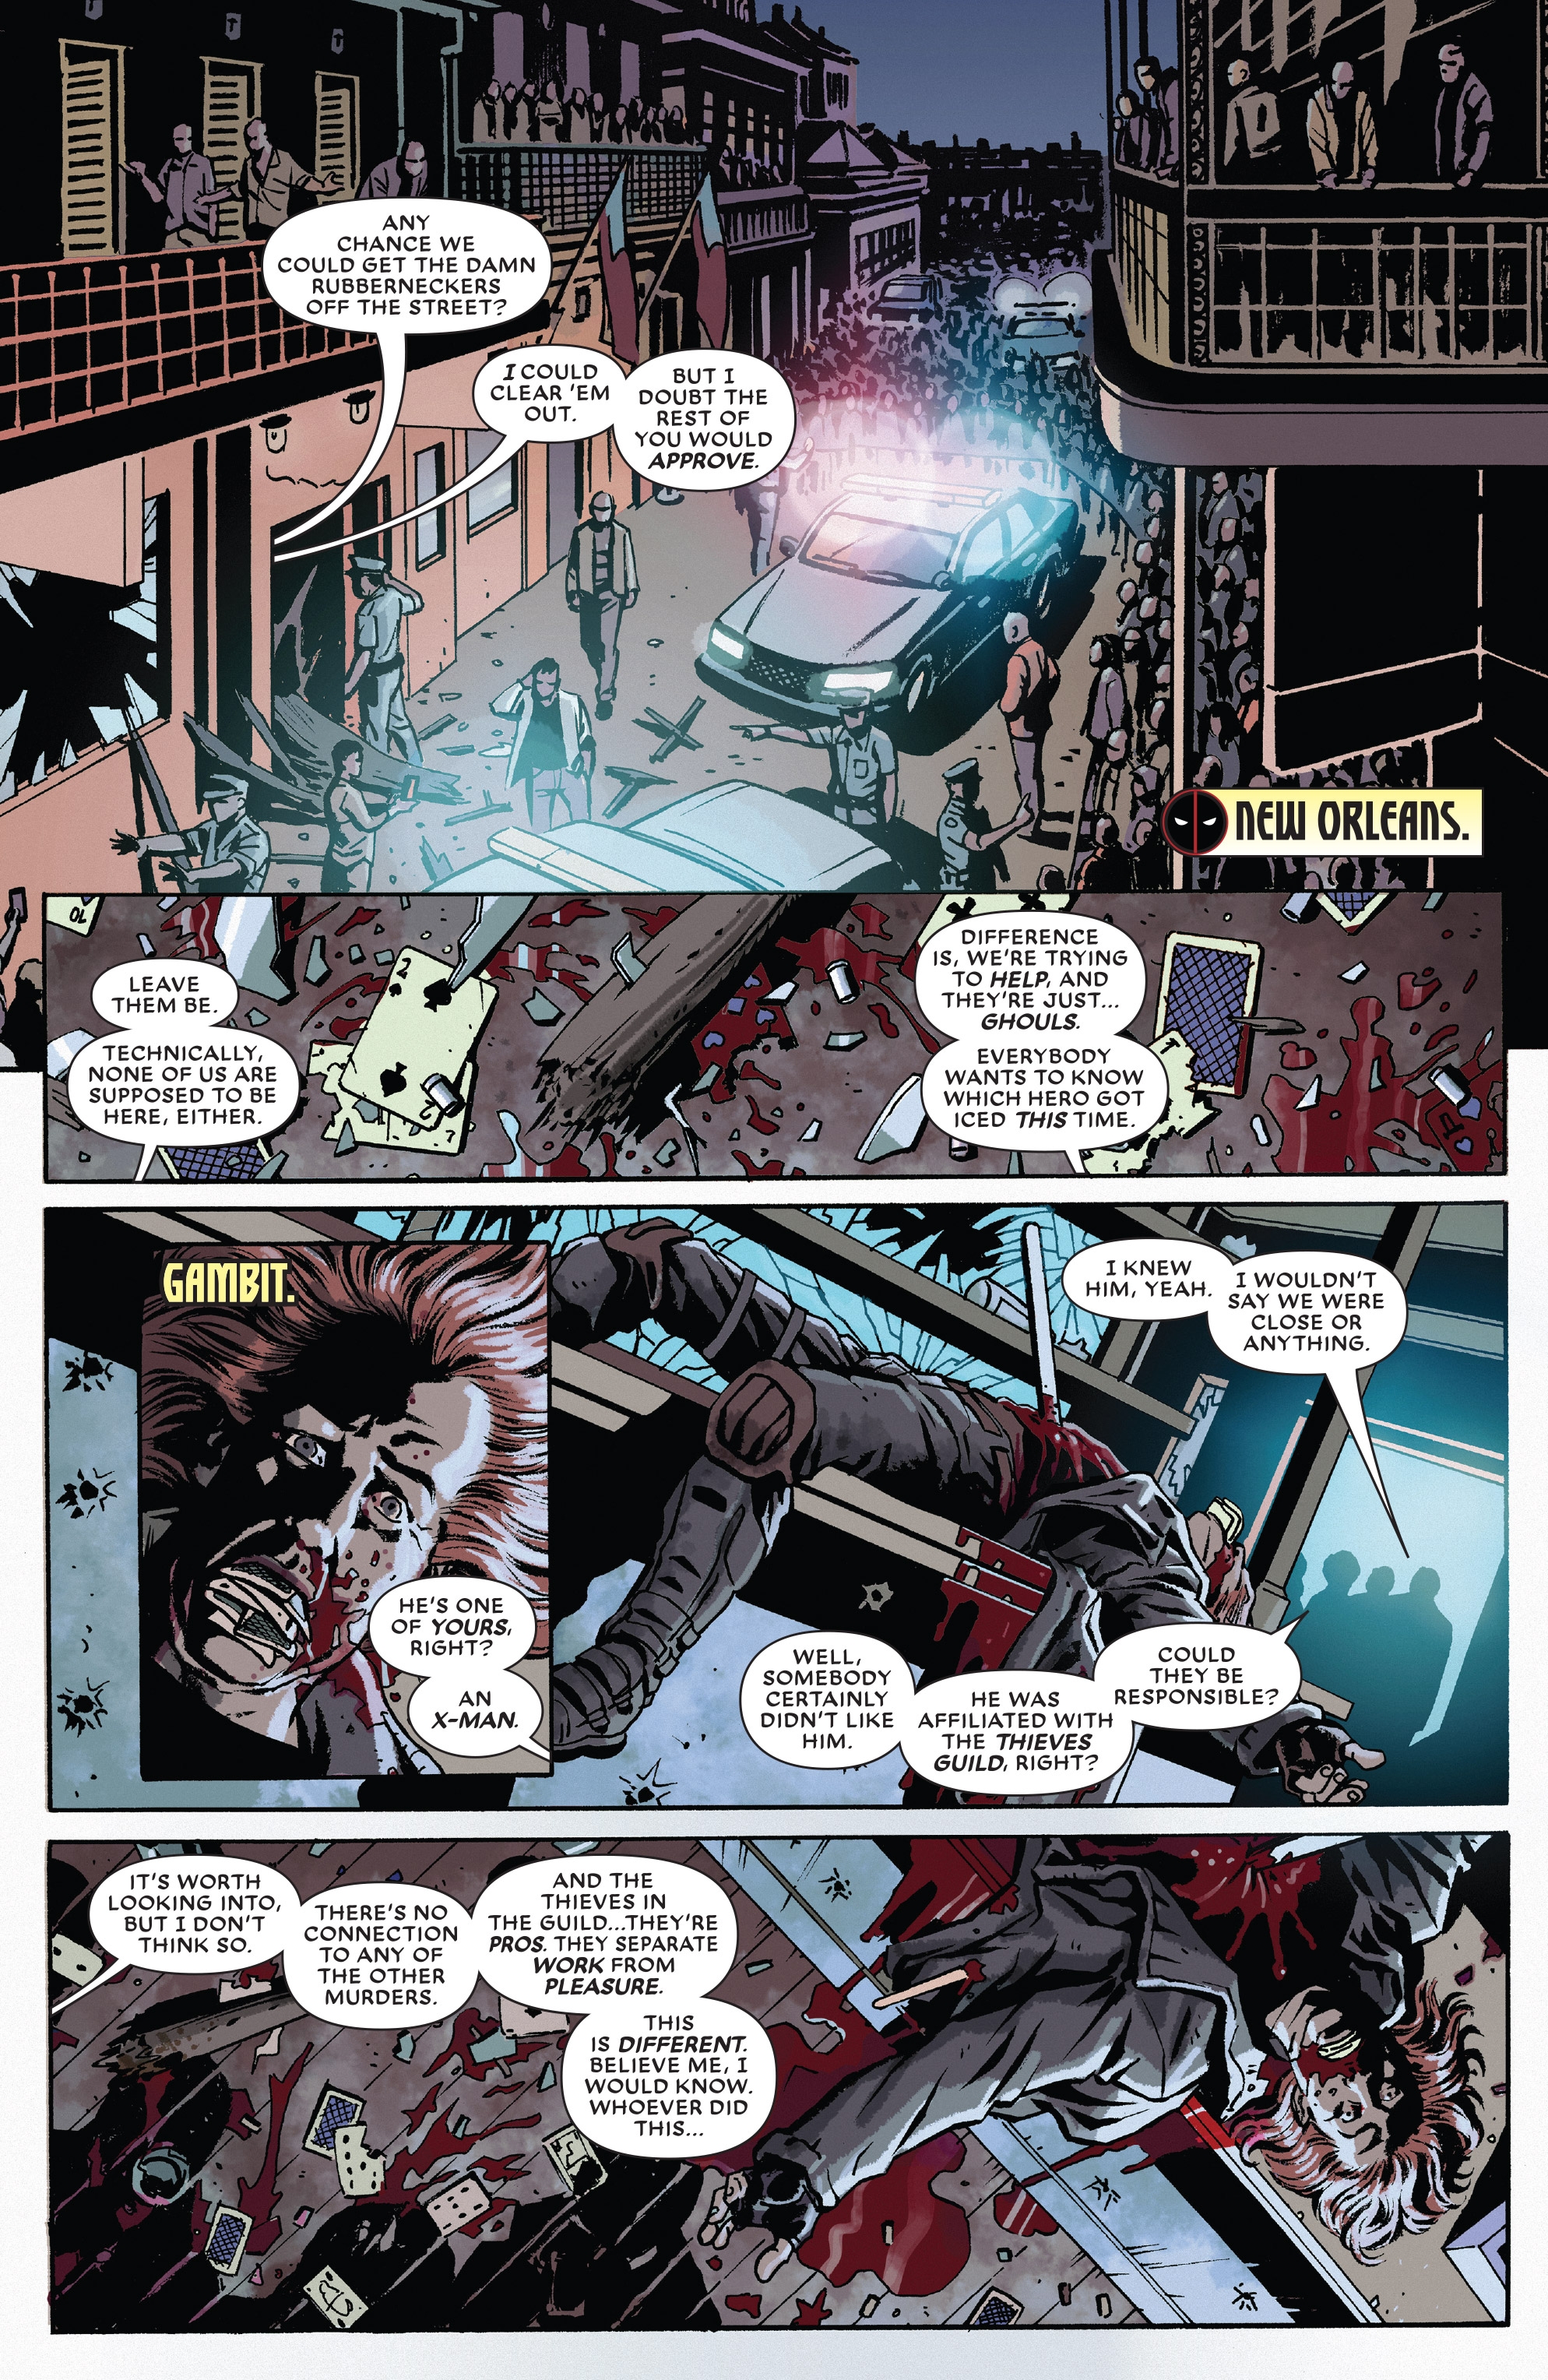 Deadpool Kills The Marvel Universe Again (2017) : Chapter 1 - Page 3